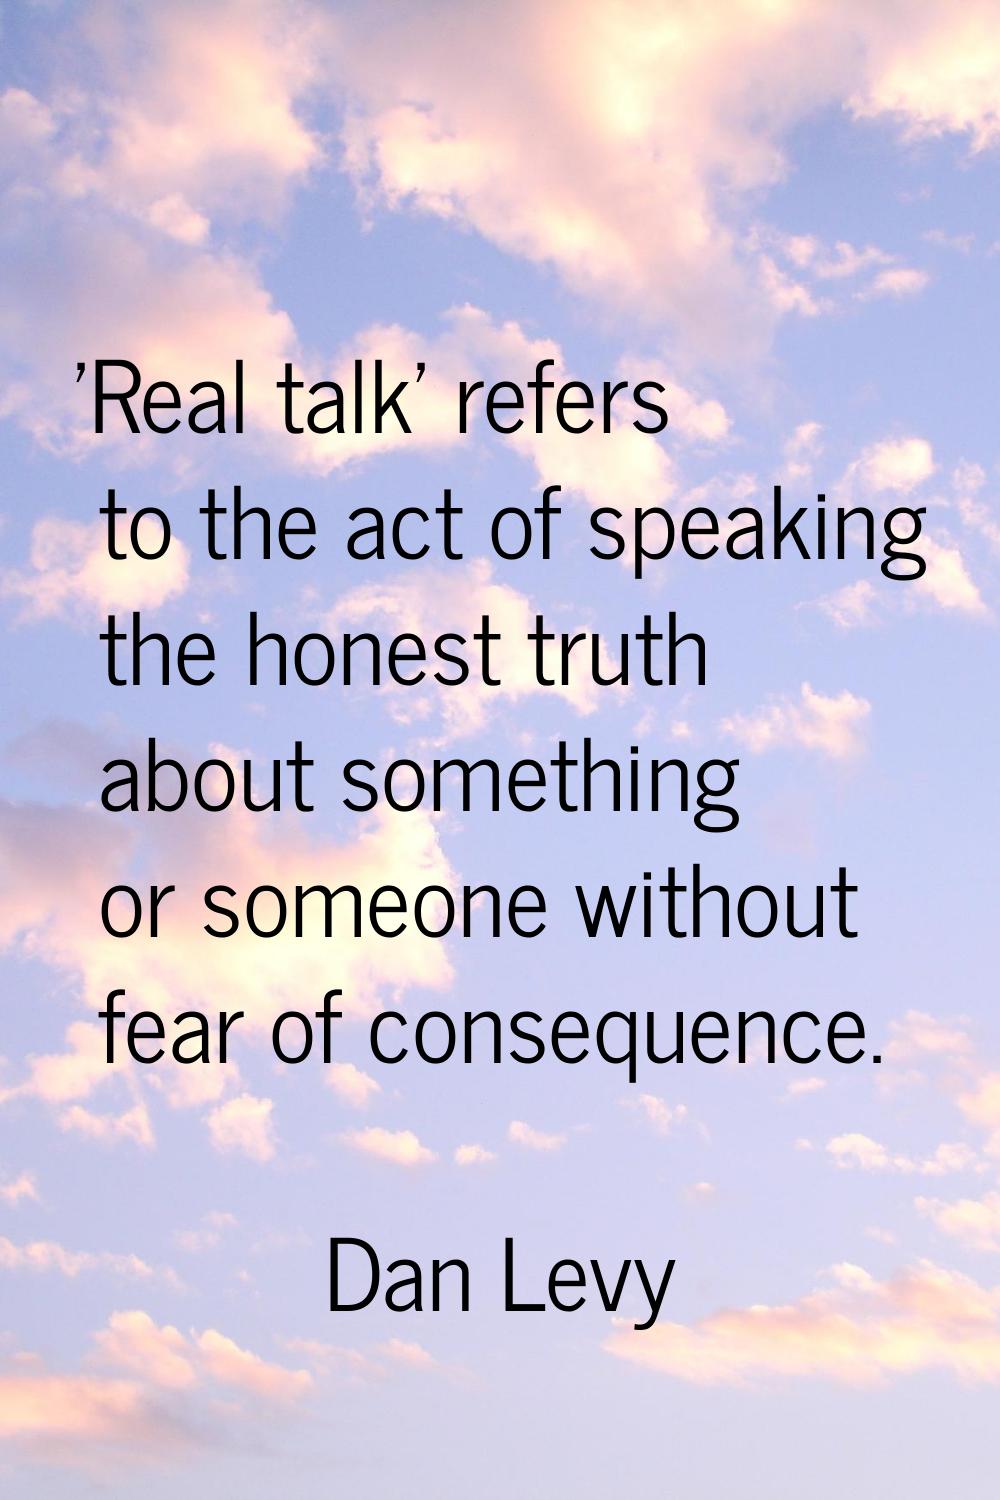 'Real talk' refers to the act of speaking the honest truth about something or someone without fear 